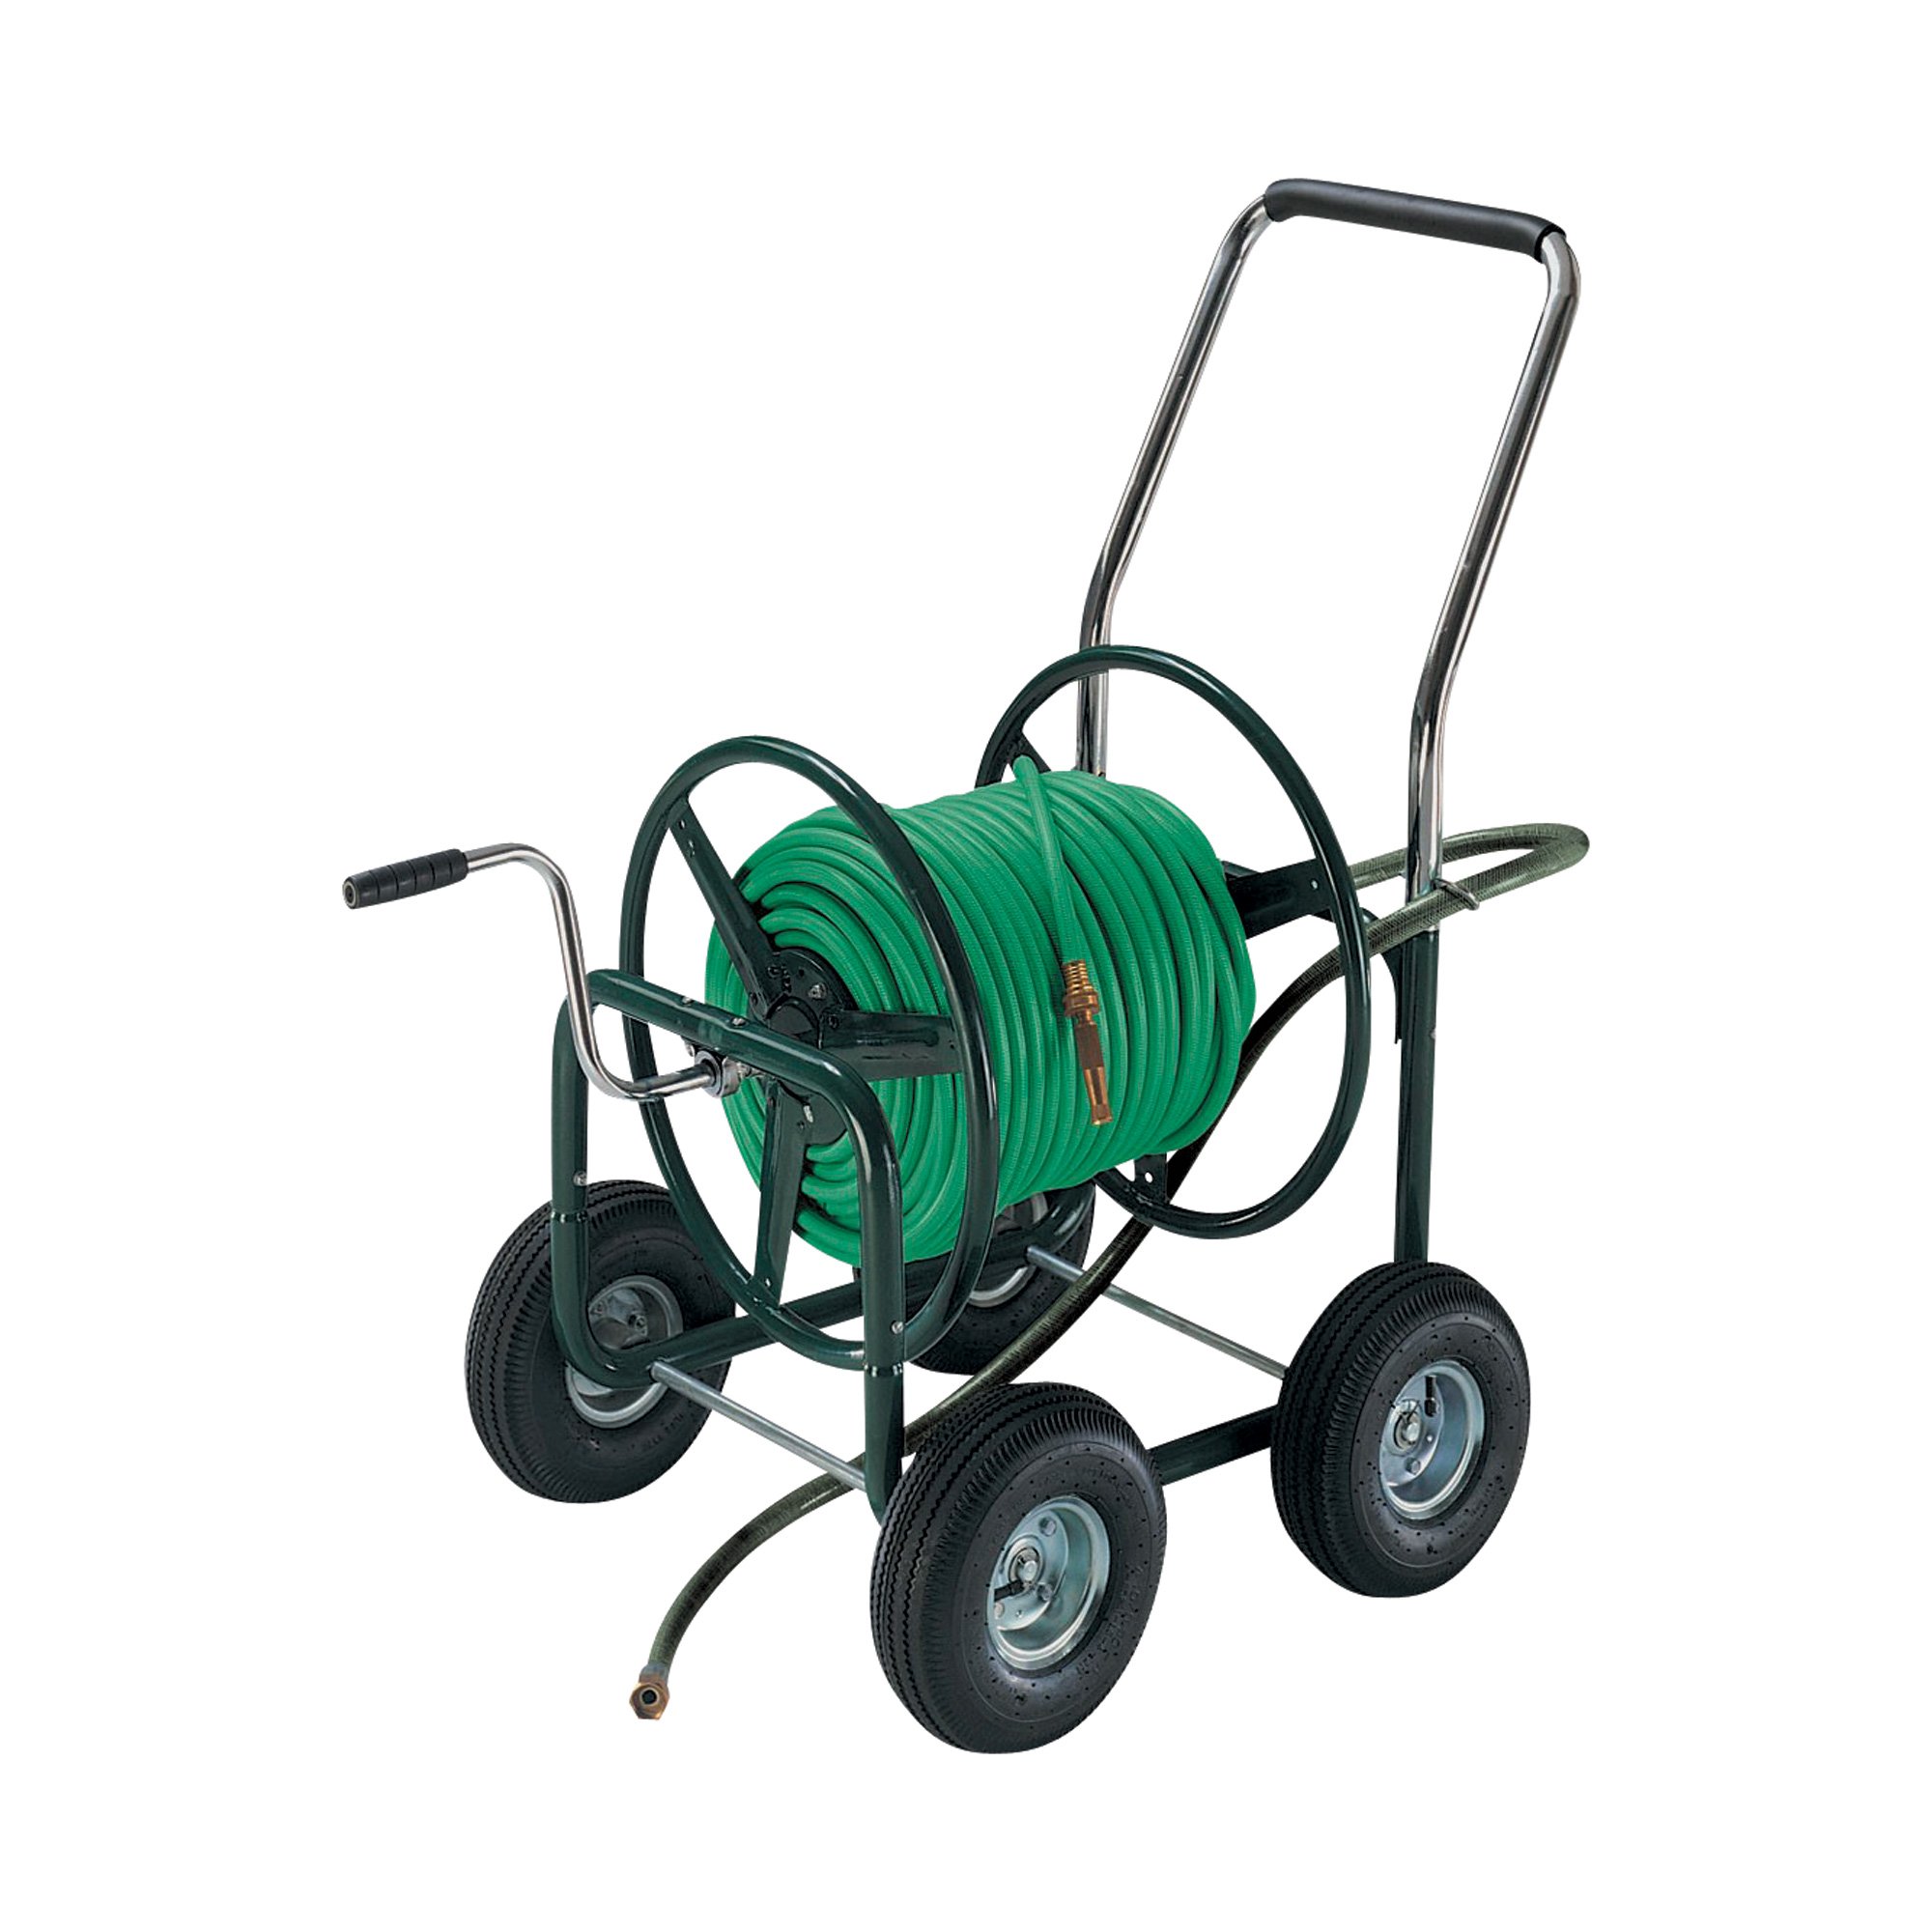 Ames Industrial Hose Wagon — Holds 5/8in. x 400ft. Hose, Model